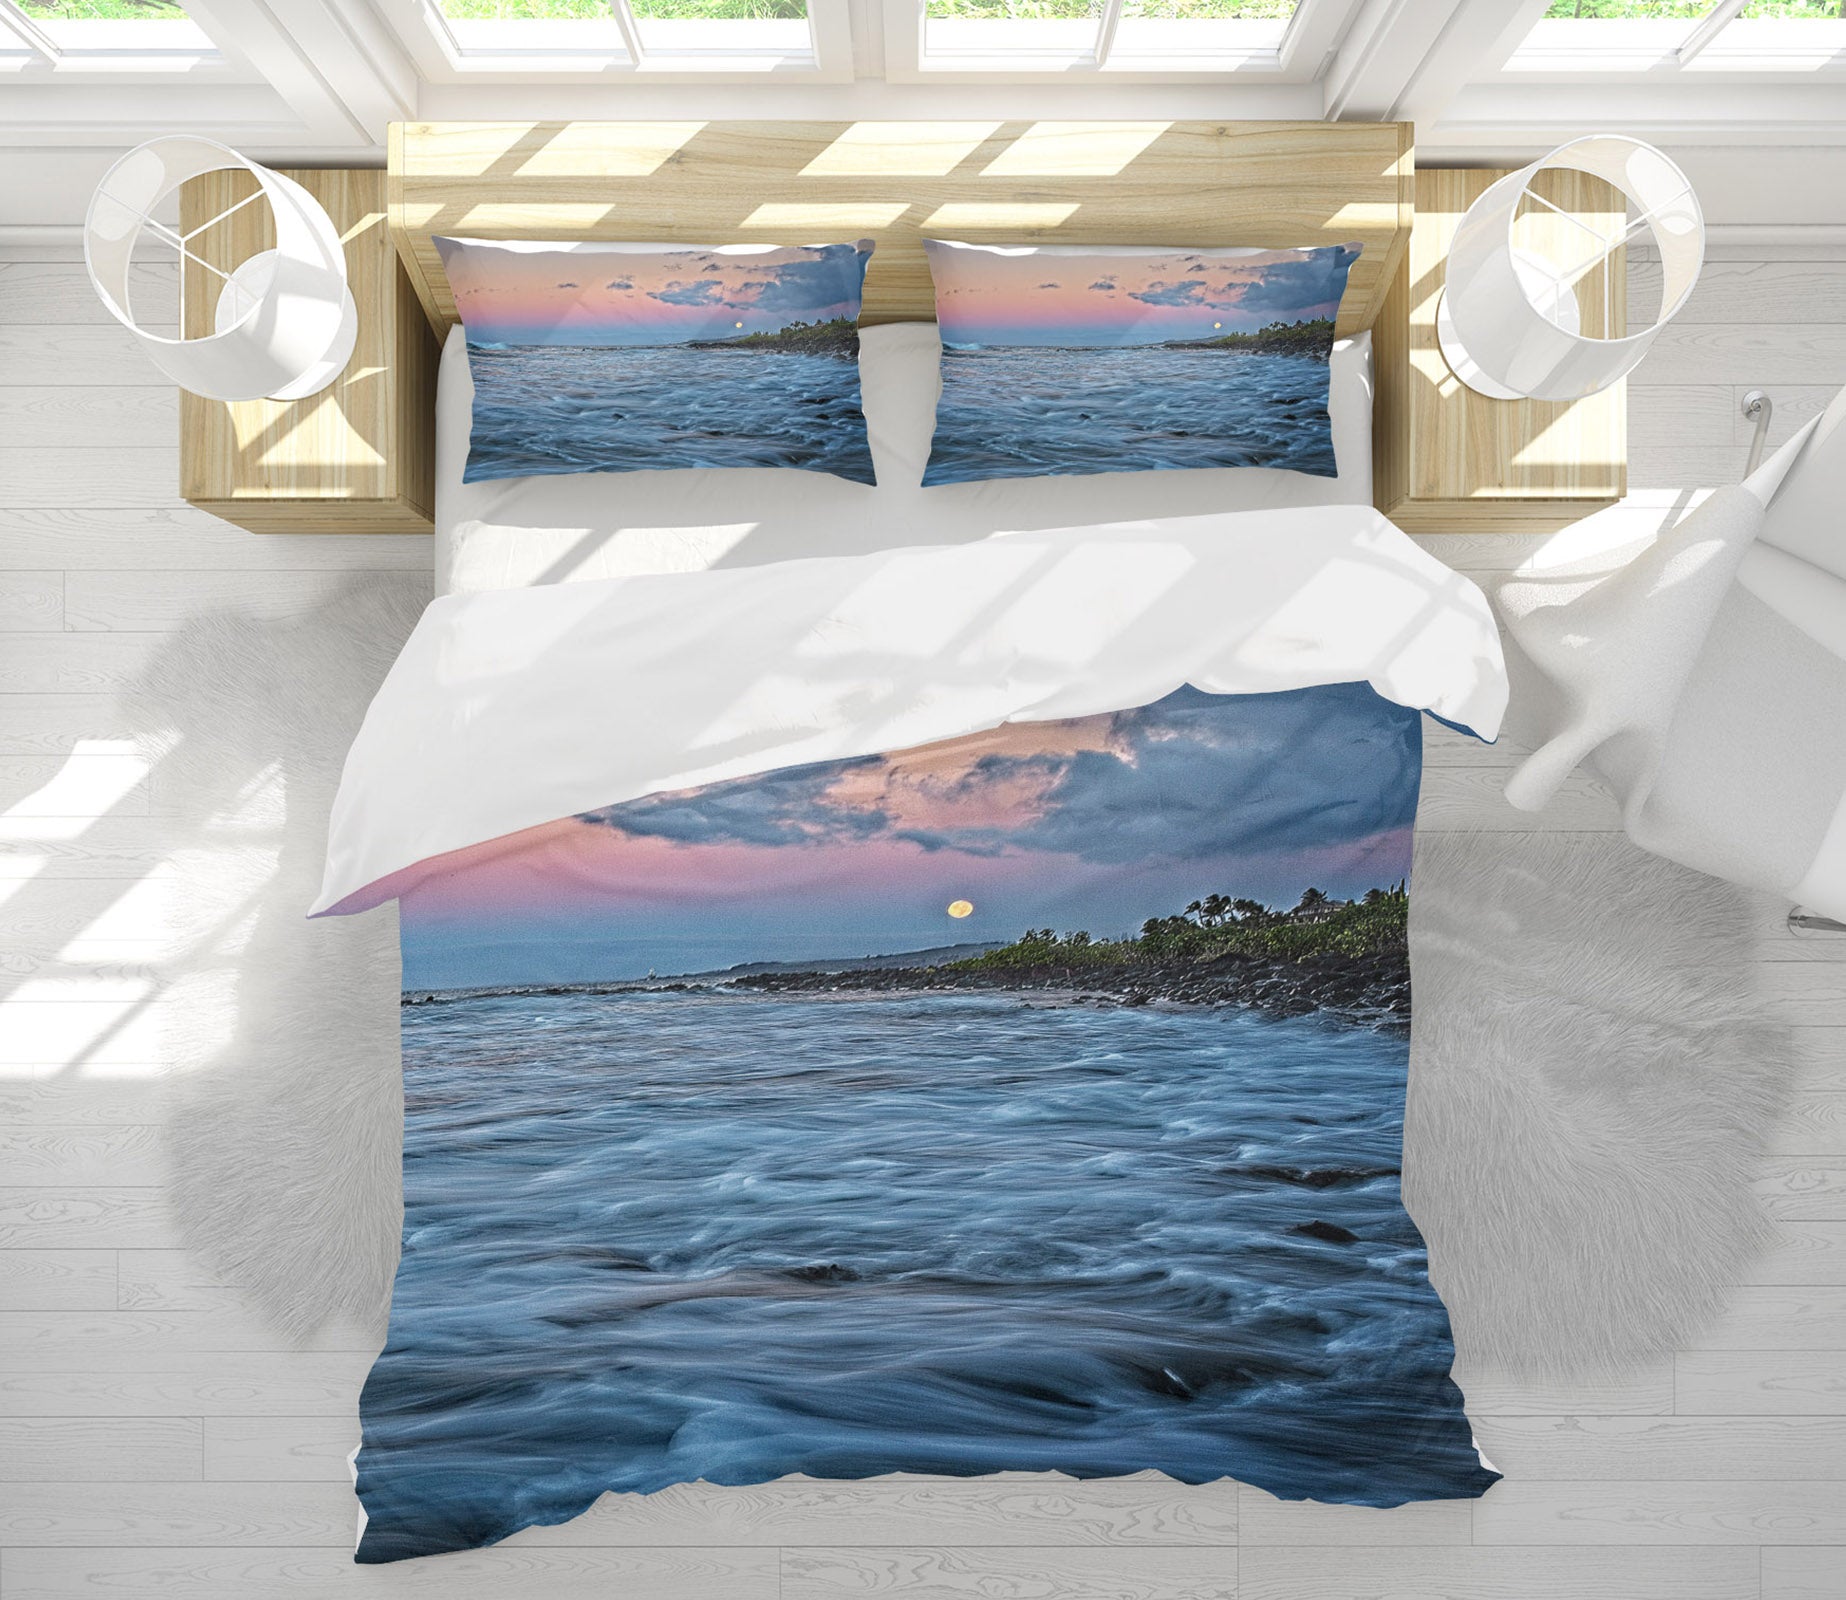 3D Sea Waves 62180 Kathy Barefield Bedding Bed Pillowcases Quilt